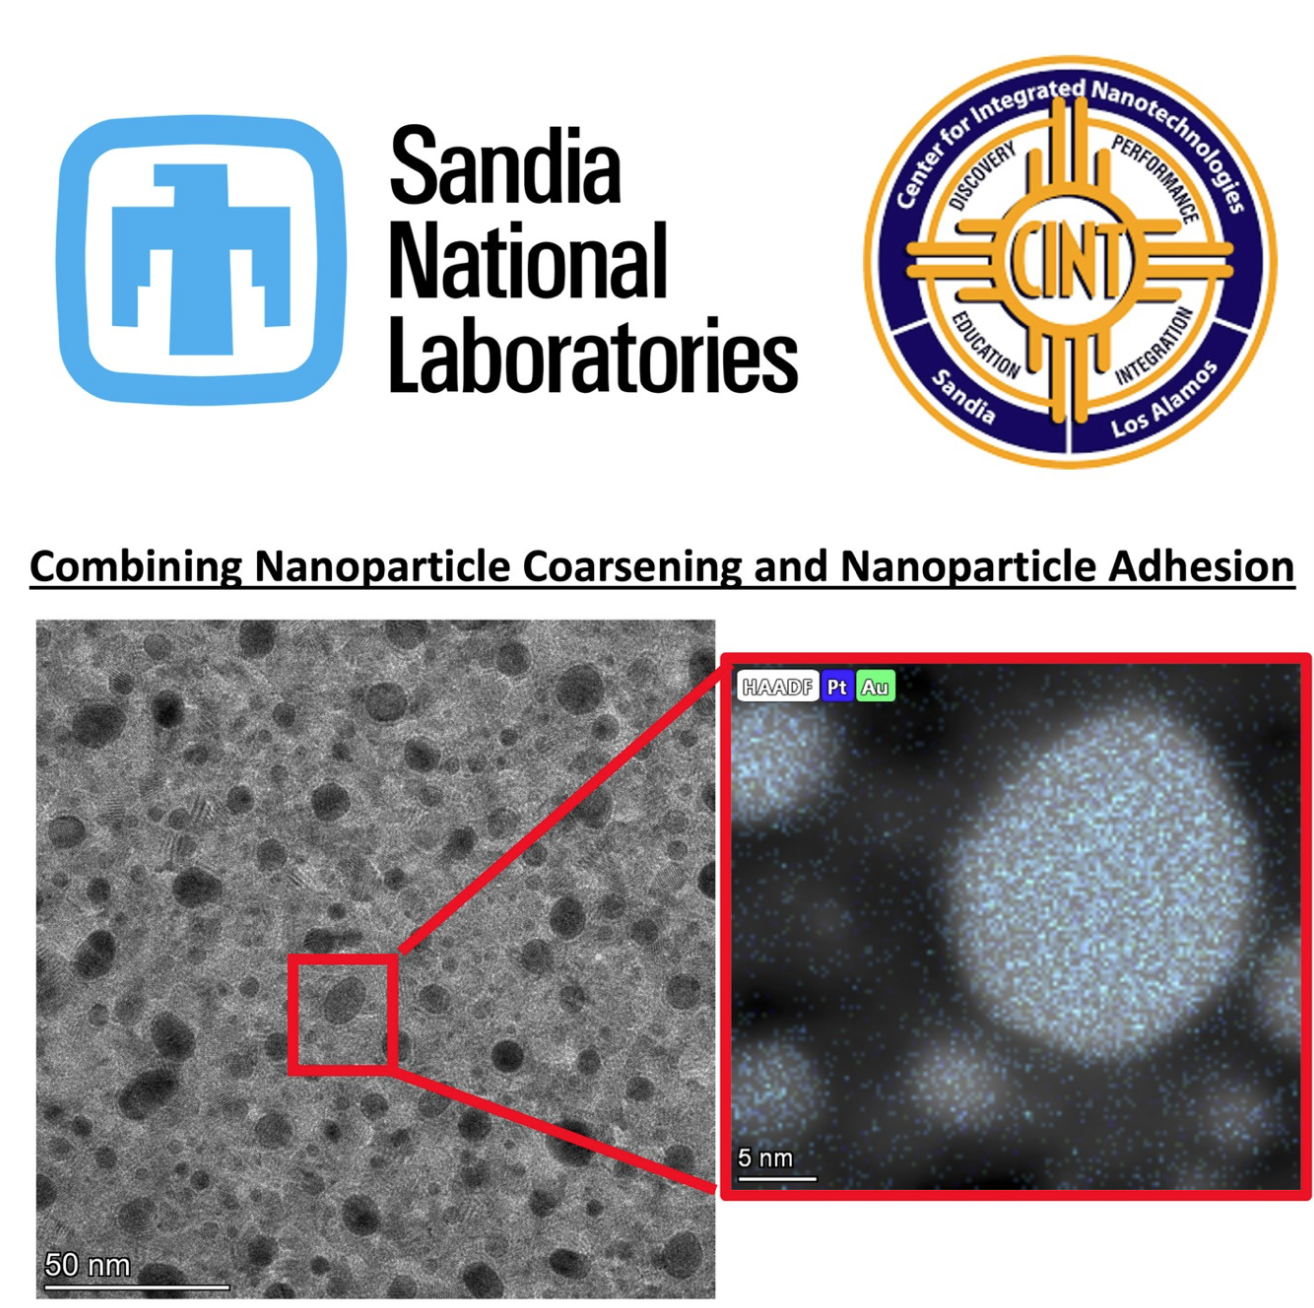 Combining Nanoparticle Coarsening and Nanoparticle Adhesion